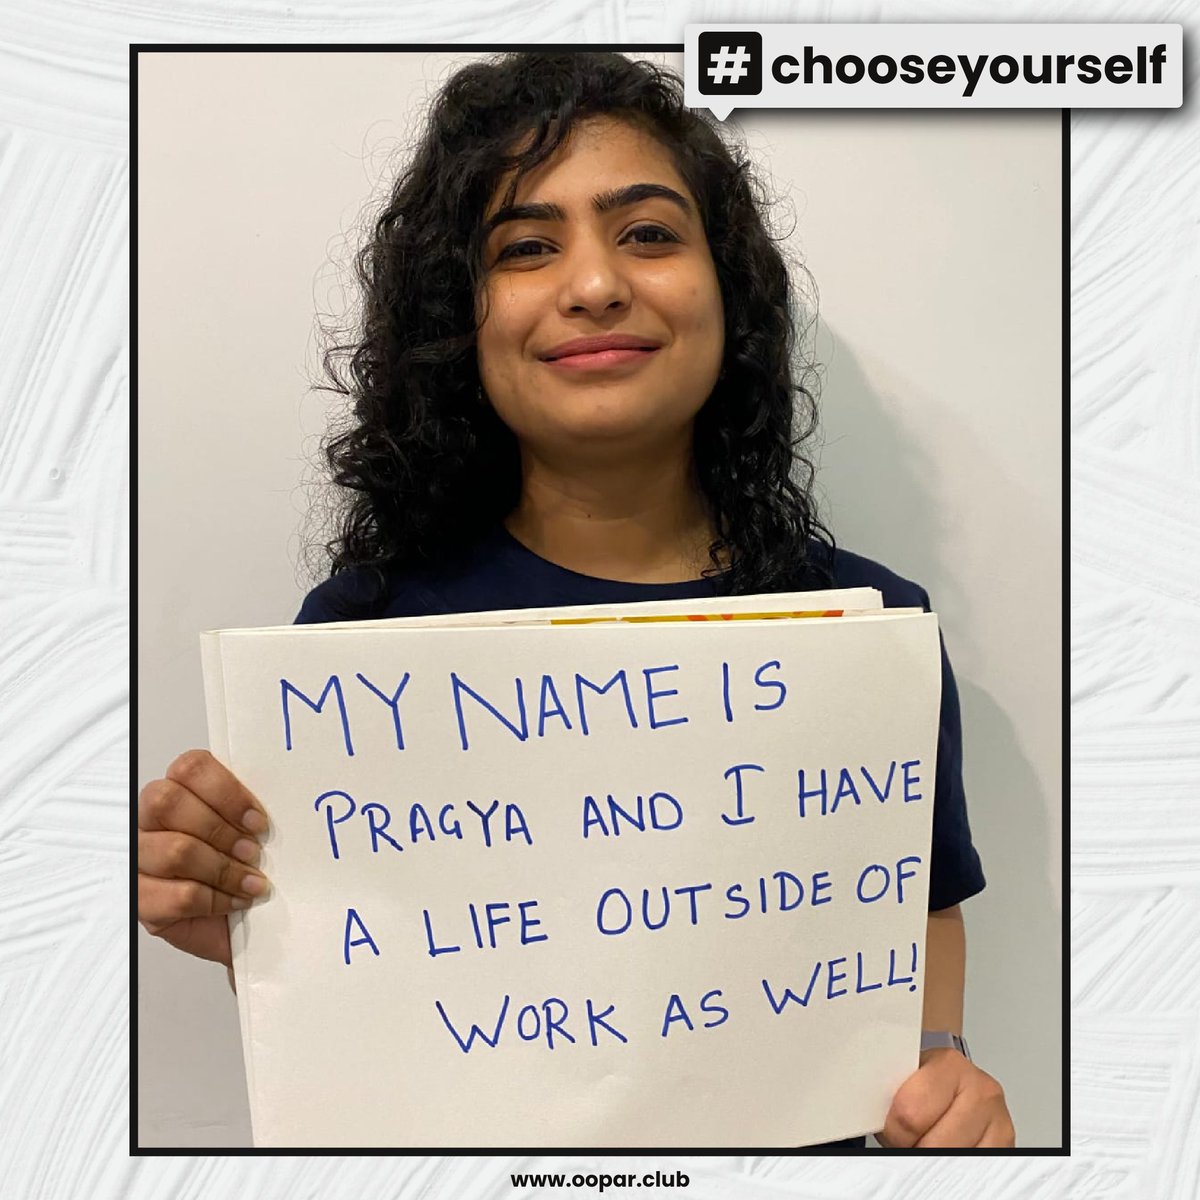 Our dreams and personal goals don't have to take a backseat to our job; we CAN have it all.

Nothing happens overnight, but the key is to keep getting better. Start getting better by deciding to #chooseyourself.

#WorkLifeBalance #personalgrowth